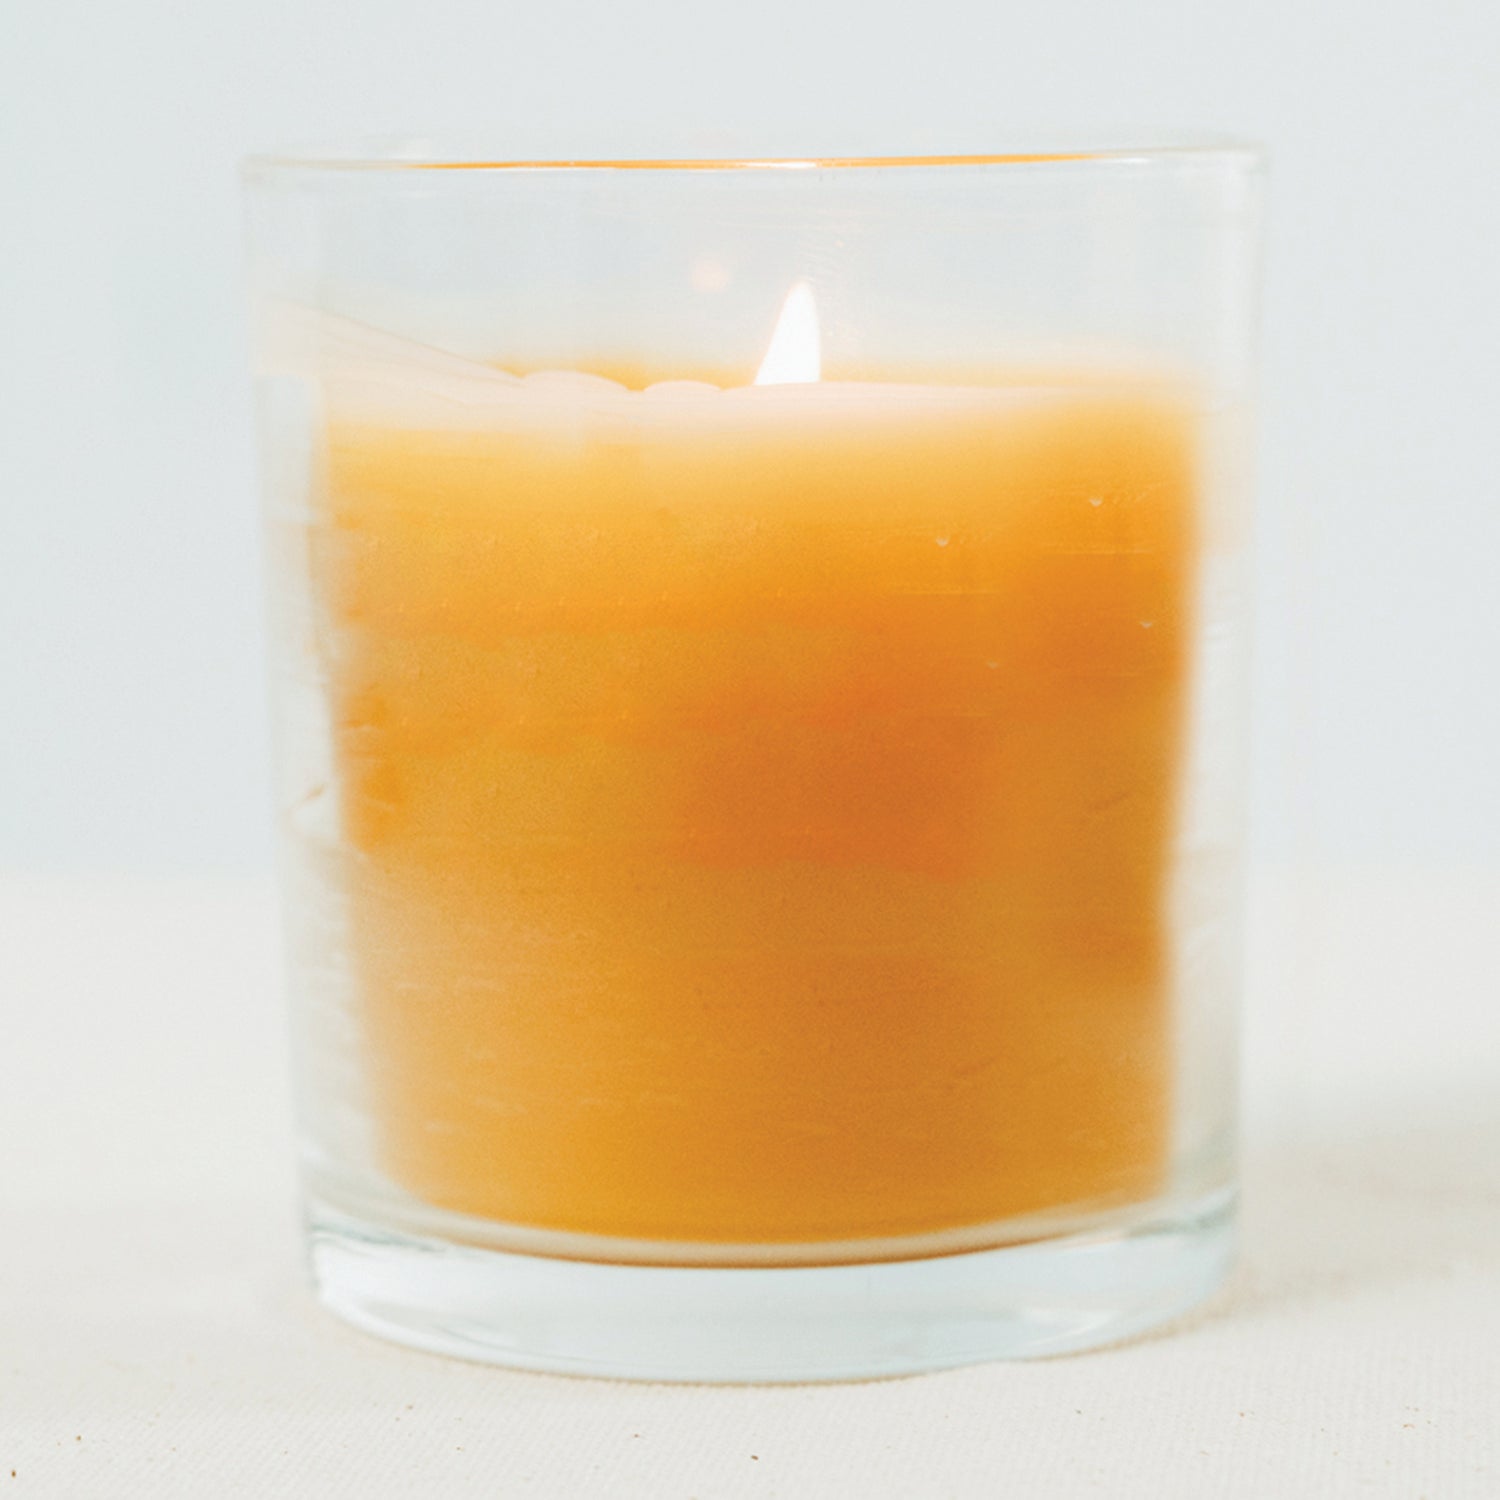 Learn How to Make Beeswax Candles in 7 Simple Steps.